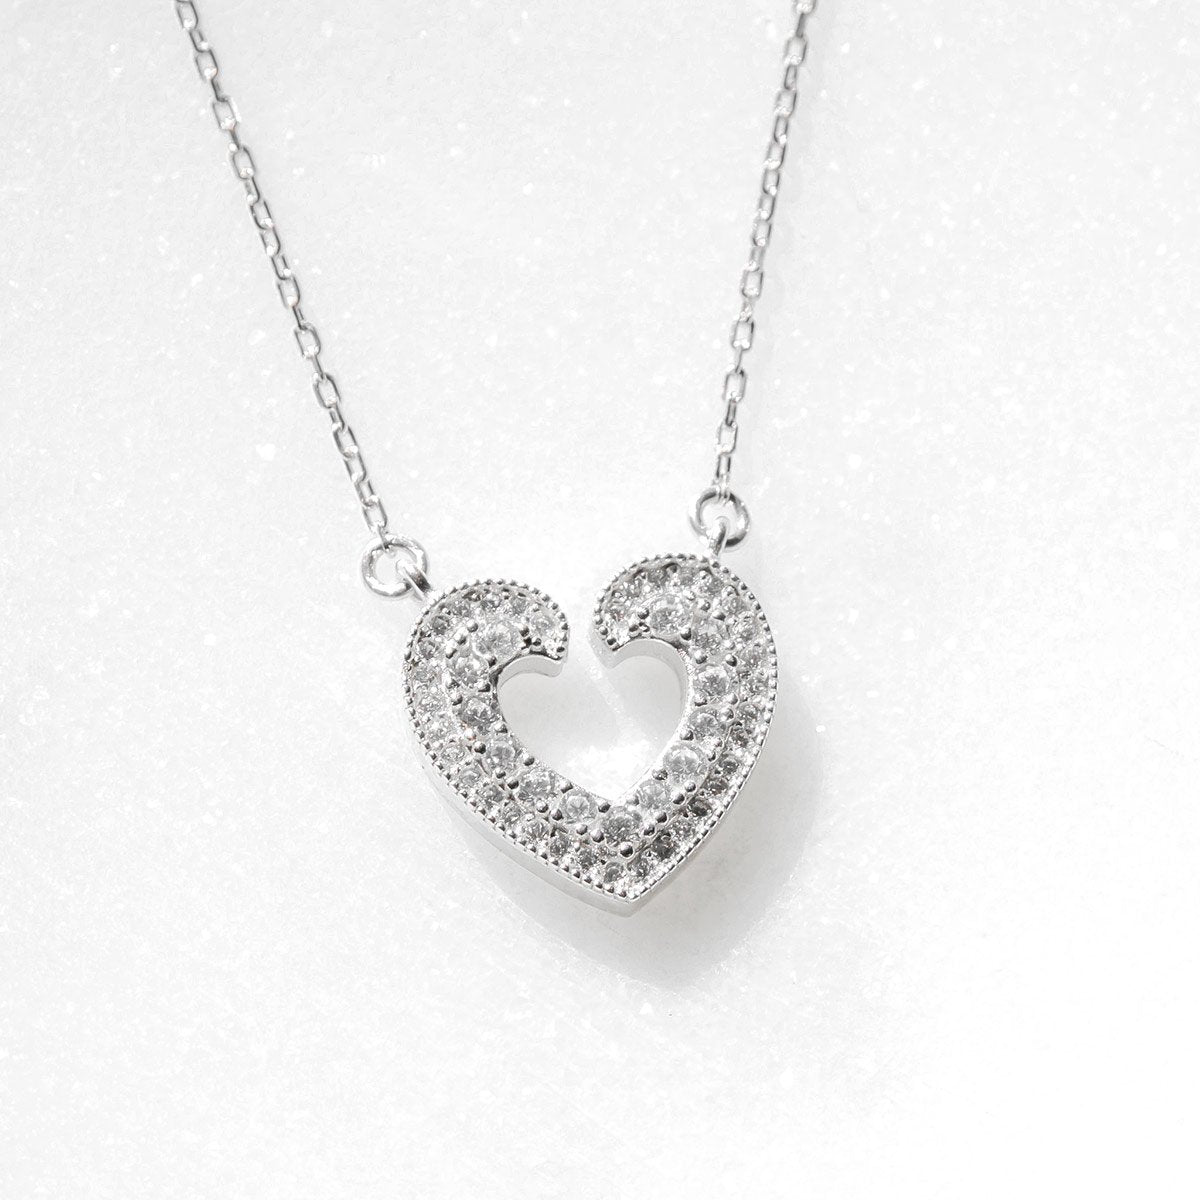 Thinking of You - Open Heart Necklace Gift Set